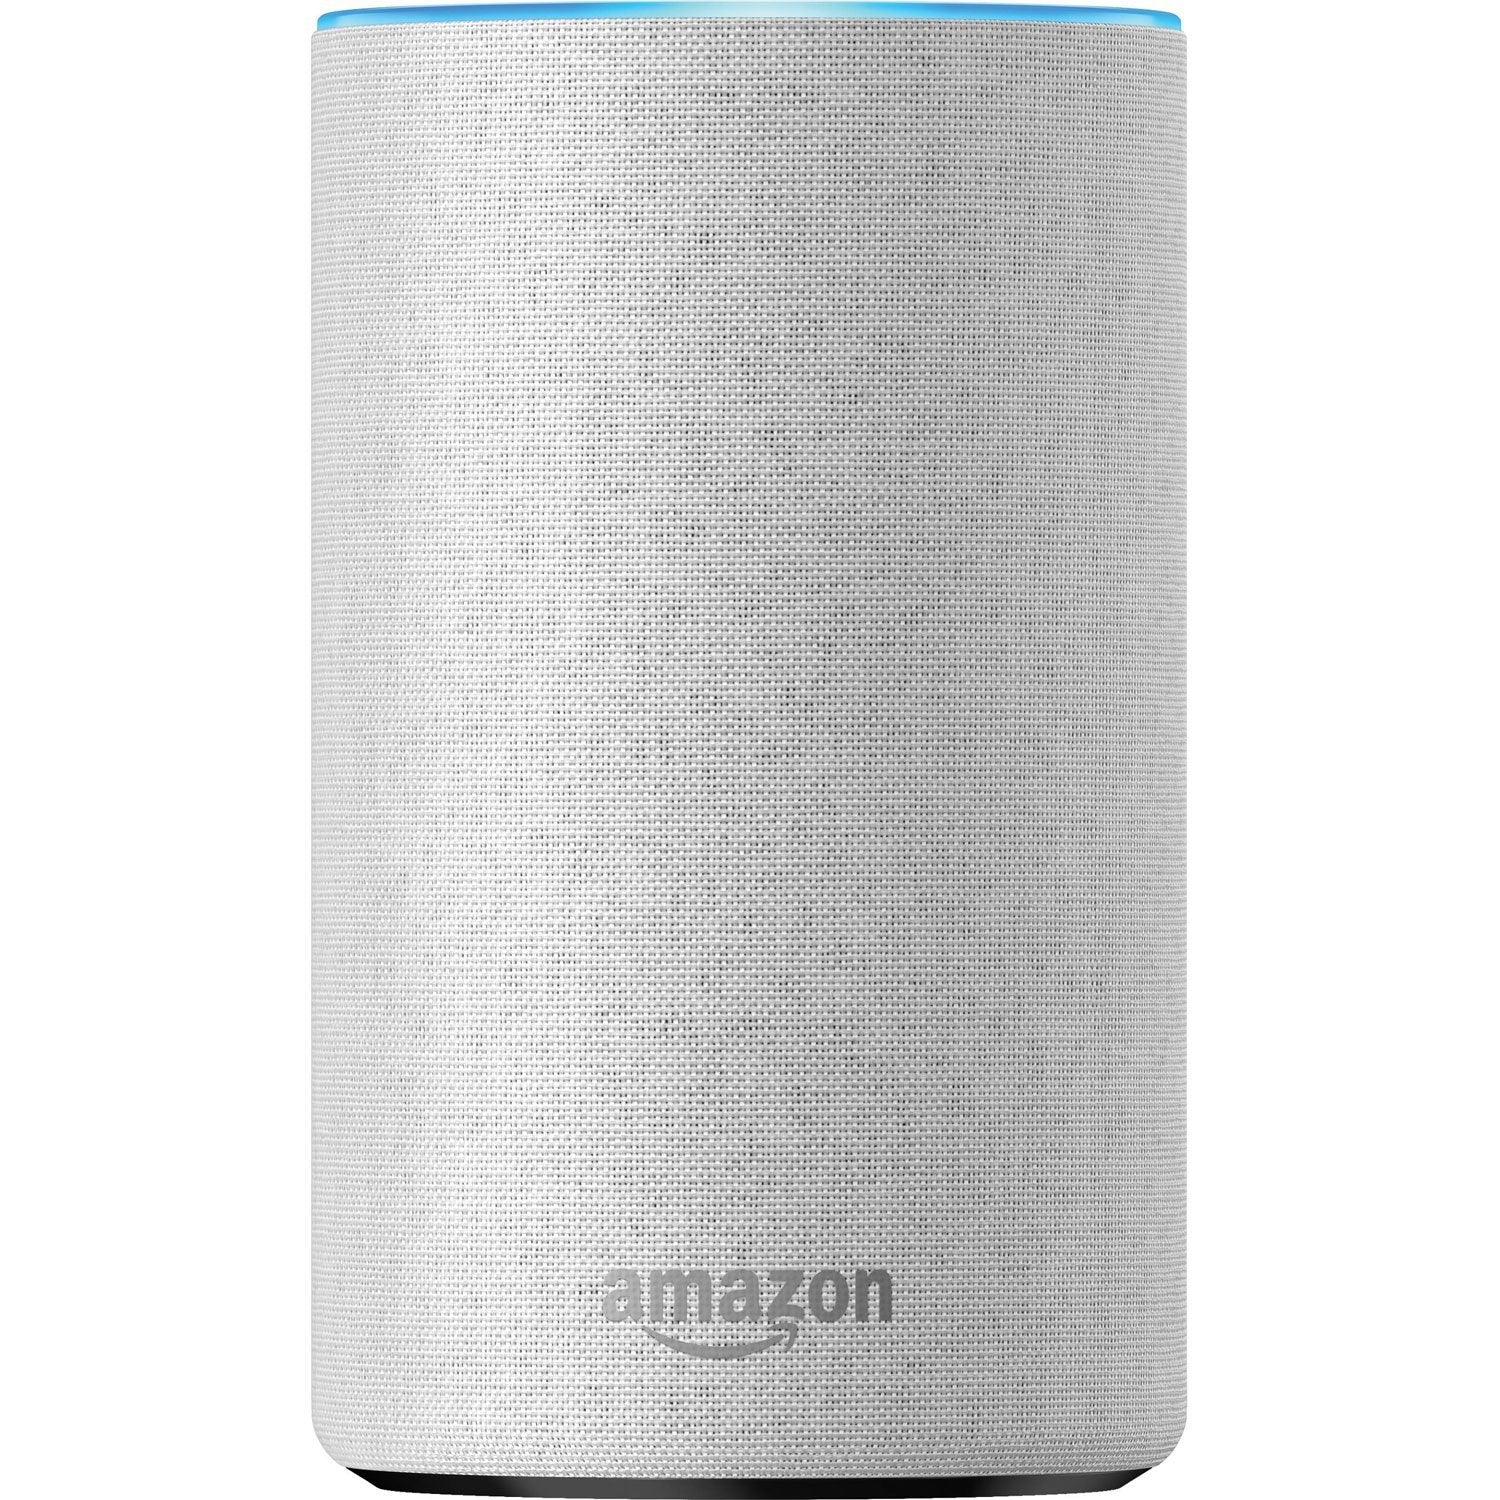 All New Amazon Echo 2nd Generation 2017 Sandstone with improved sound powered by Dolby